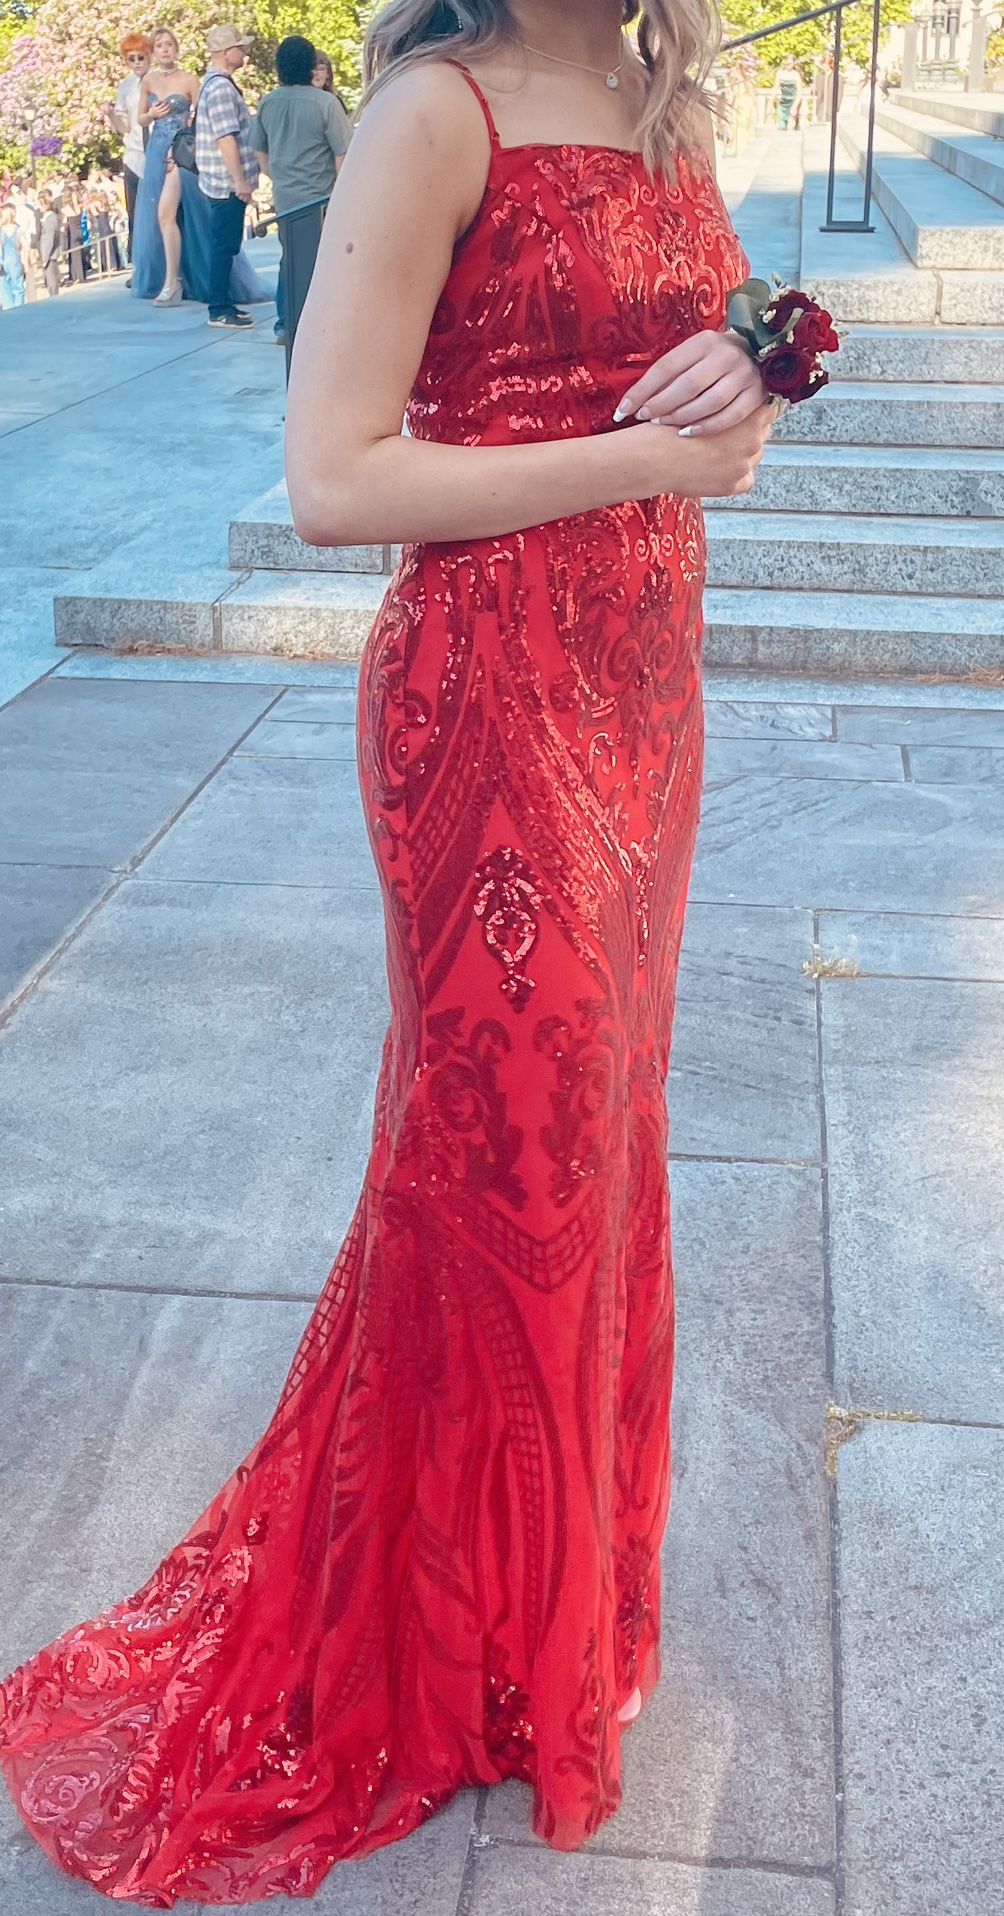 Red Prom Dress, Size Small or Xs